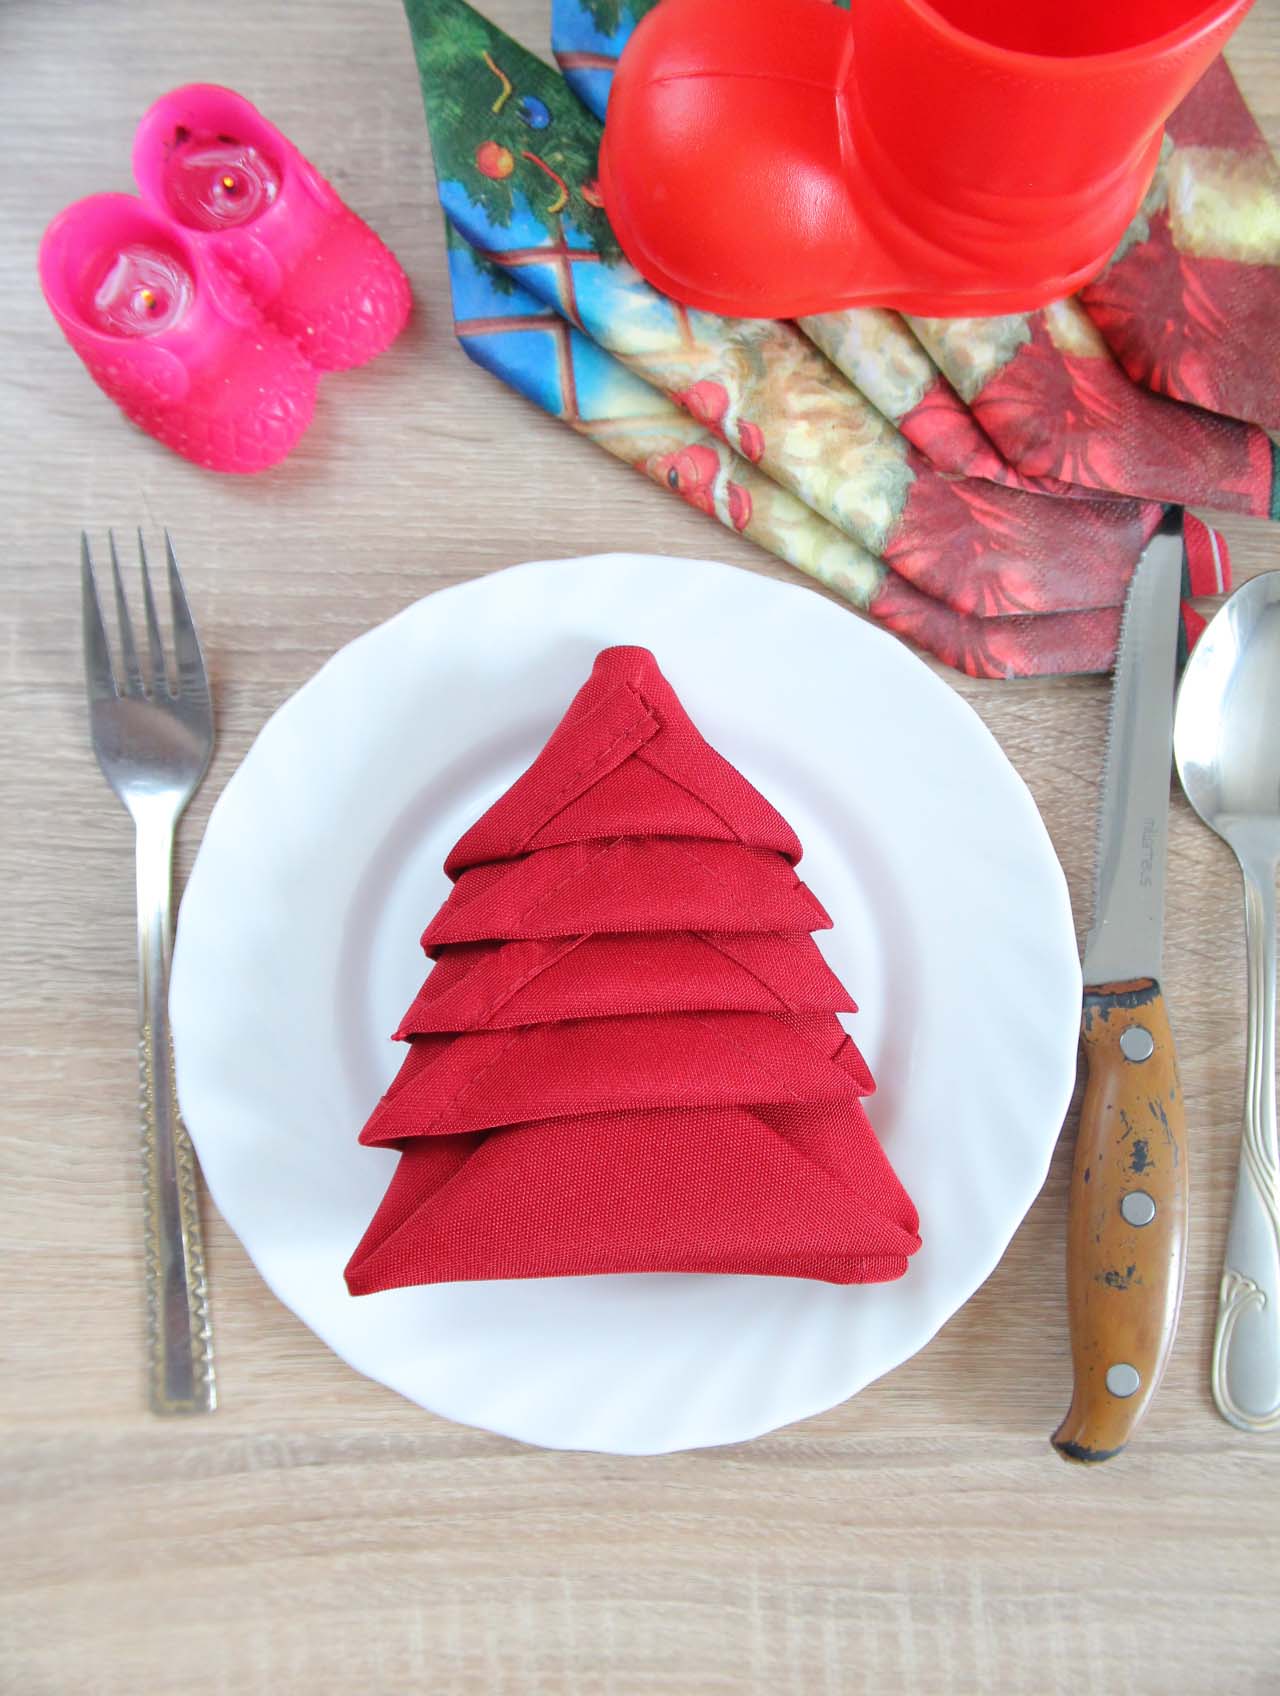 Make brilliant and easy napkin folding for your Christmas